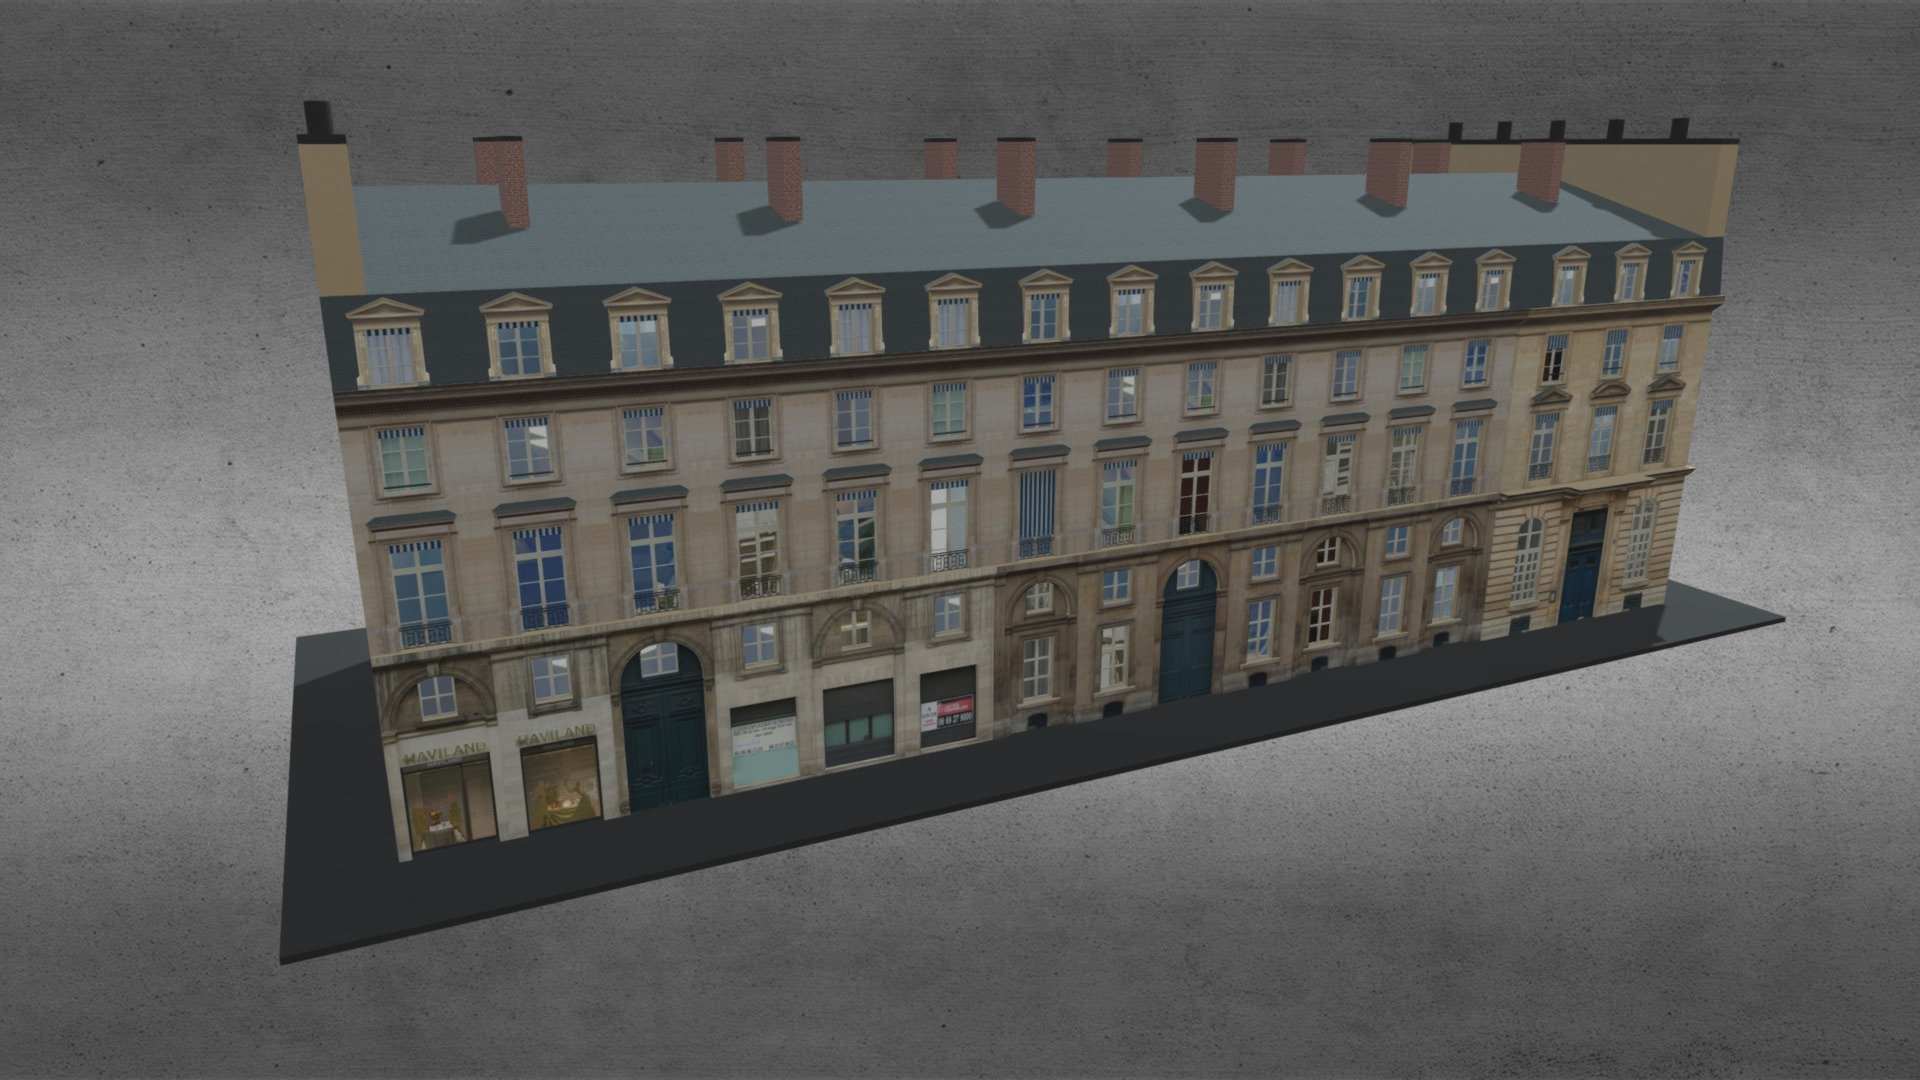 Typical Parisian Apartment Building 33
Originally created with 3ds Max 2015 and rendered in V-Ray 3.0. 

Total Poly Counts:
Poly Count = 21851
Vertex Count = 26802

Please Visit: https://nuralam3d.blogspot.com/2021/09/typical-parisian-apartment-building-33.html - Typical Parisian Apartment Building 33 - 3D model by nuralam018 3d model